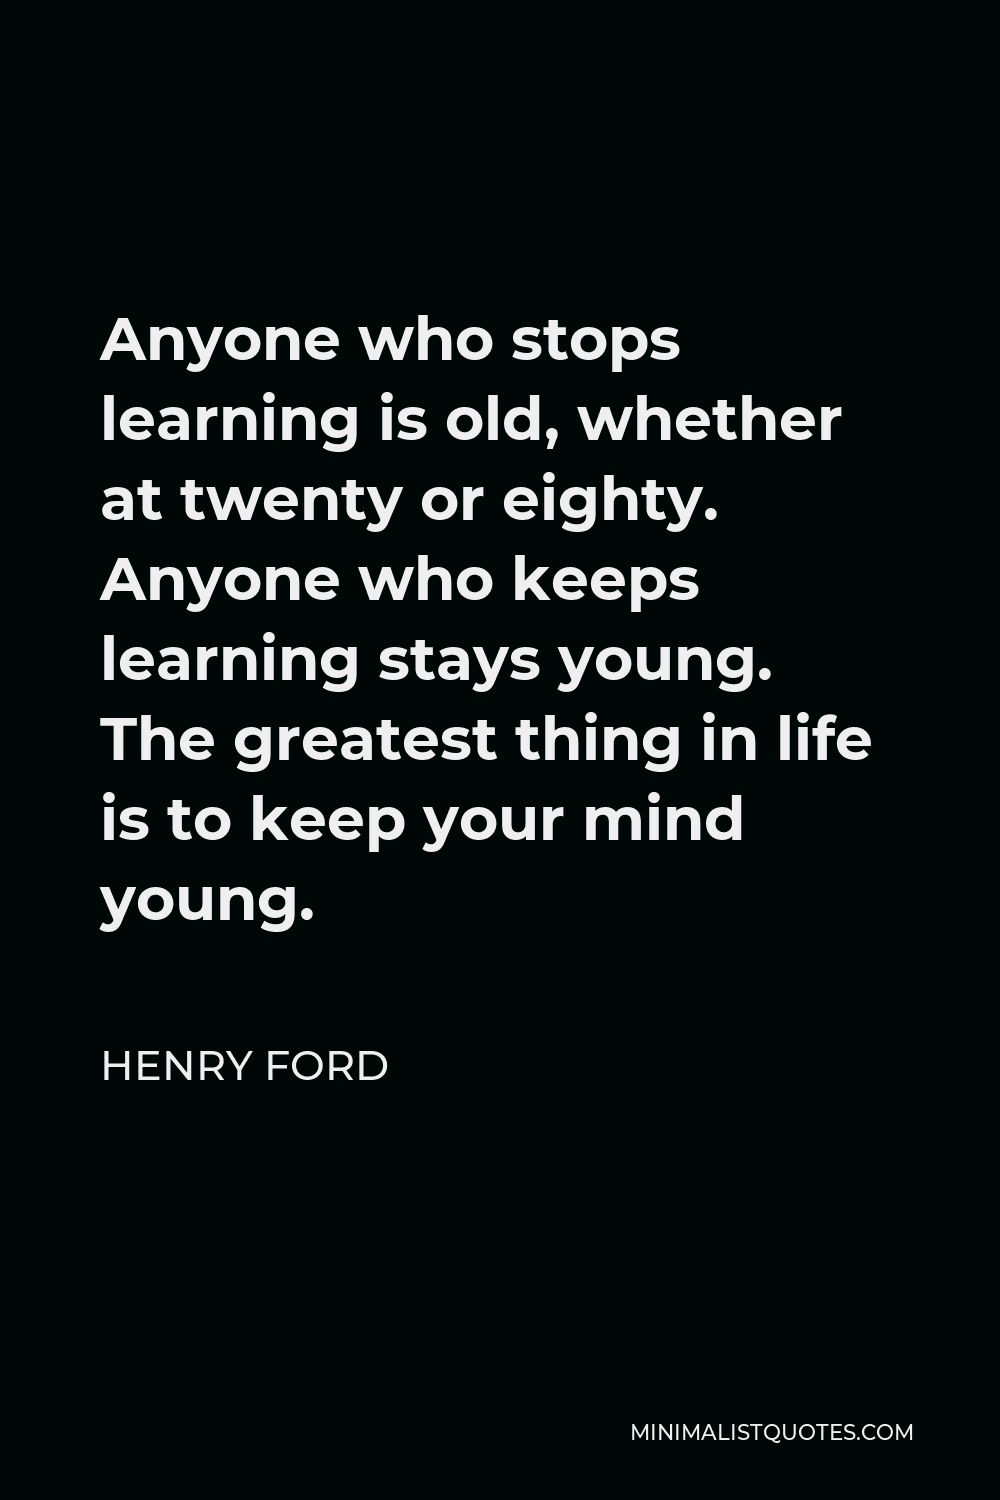 Henry Ford Quote - Anyone who stops learning is old, whether at twenty or eighty. Anyone who keeps learning stays young. The greatest thing in life is to keep your mind young.